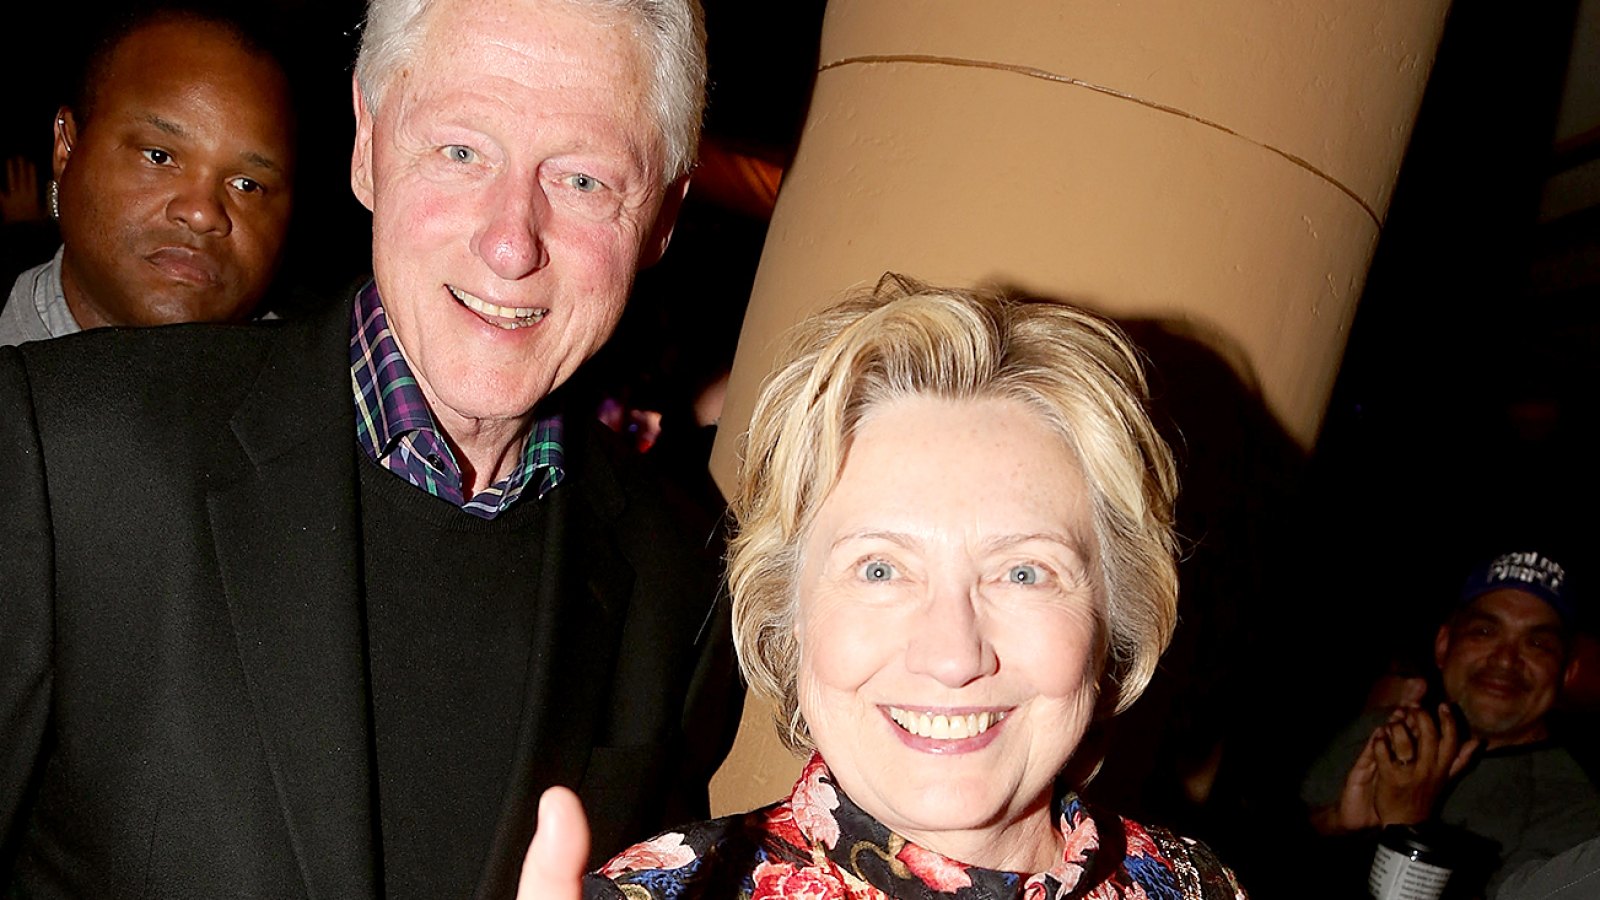 Bill Clinton and Hillary Clinton arrive at the last performance of "The Color Purple" on Broadway at The Jacobs Theater on on January 8, 2017 in New York City.